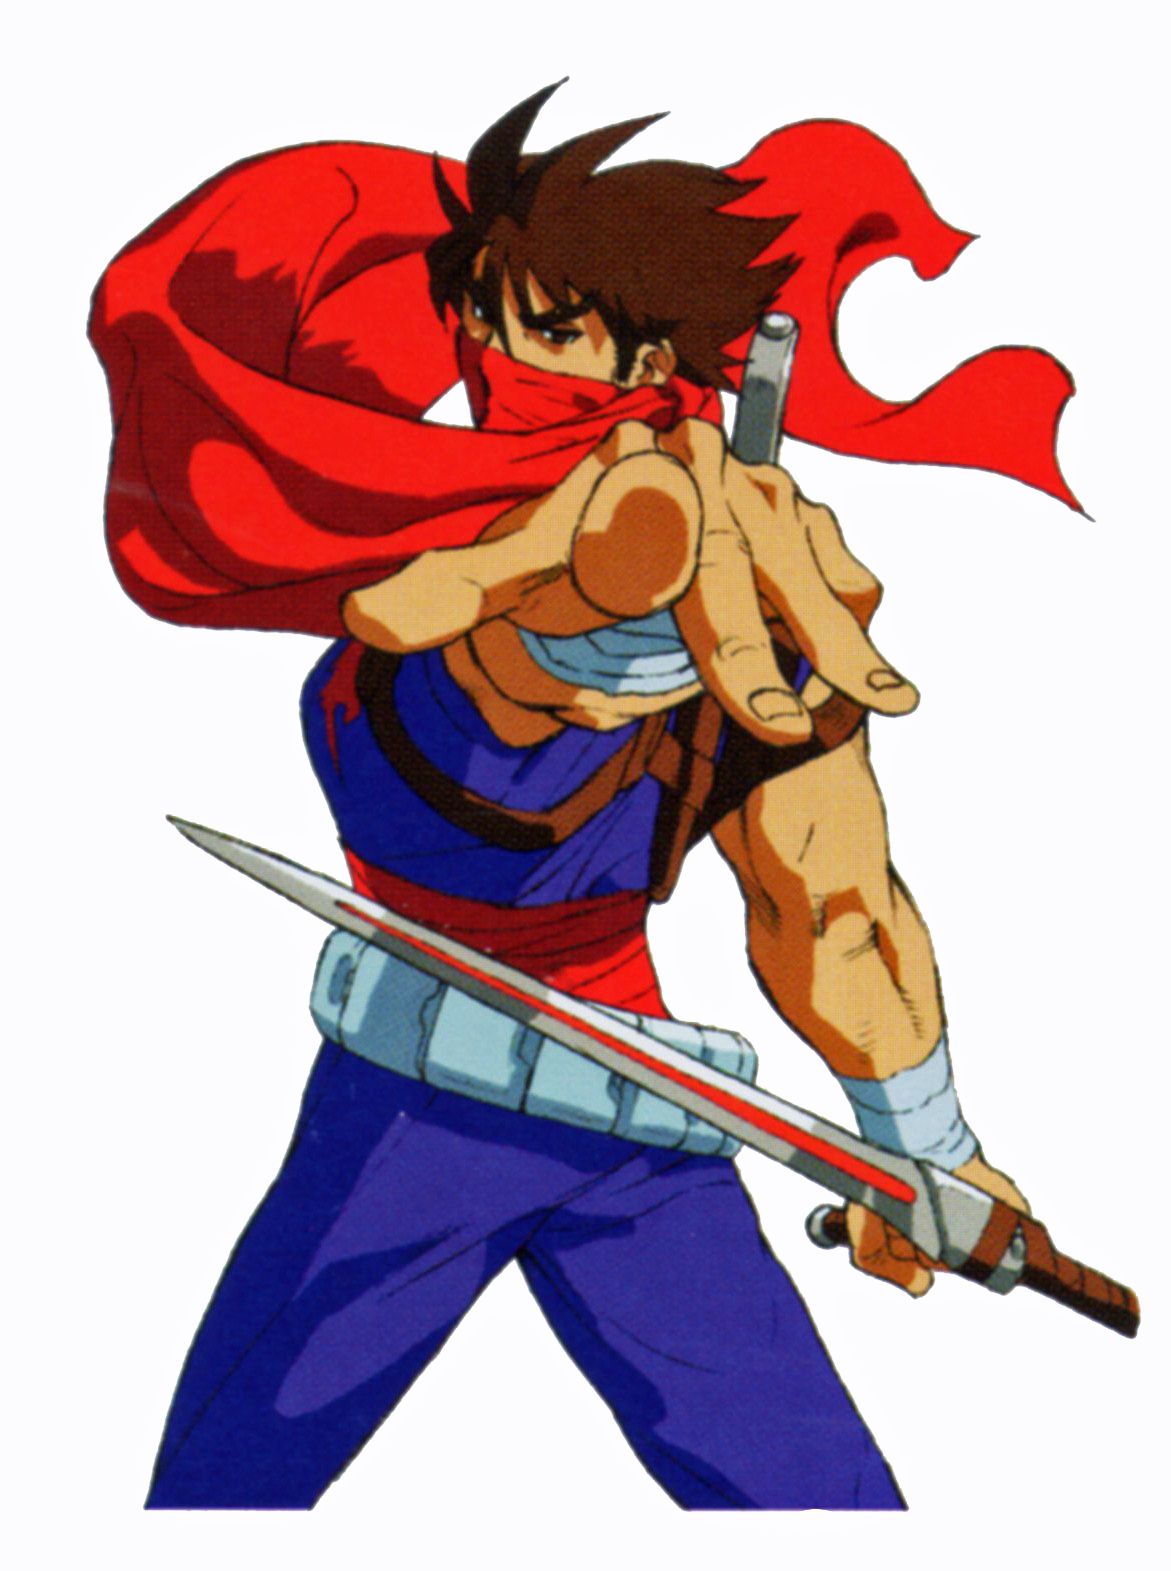 Log in Download Strider A Collection by Alex Potter 42 Pins · 341 followers Last updated 3 years ago Safebooru is a anime and manga picture search engine, image are being updated hourly. Strider vs. Hien by indesign More information